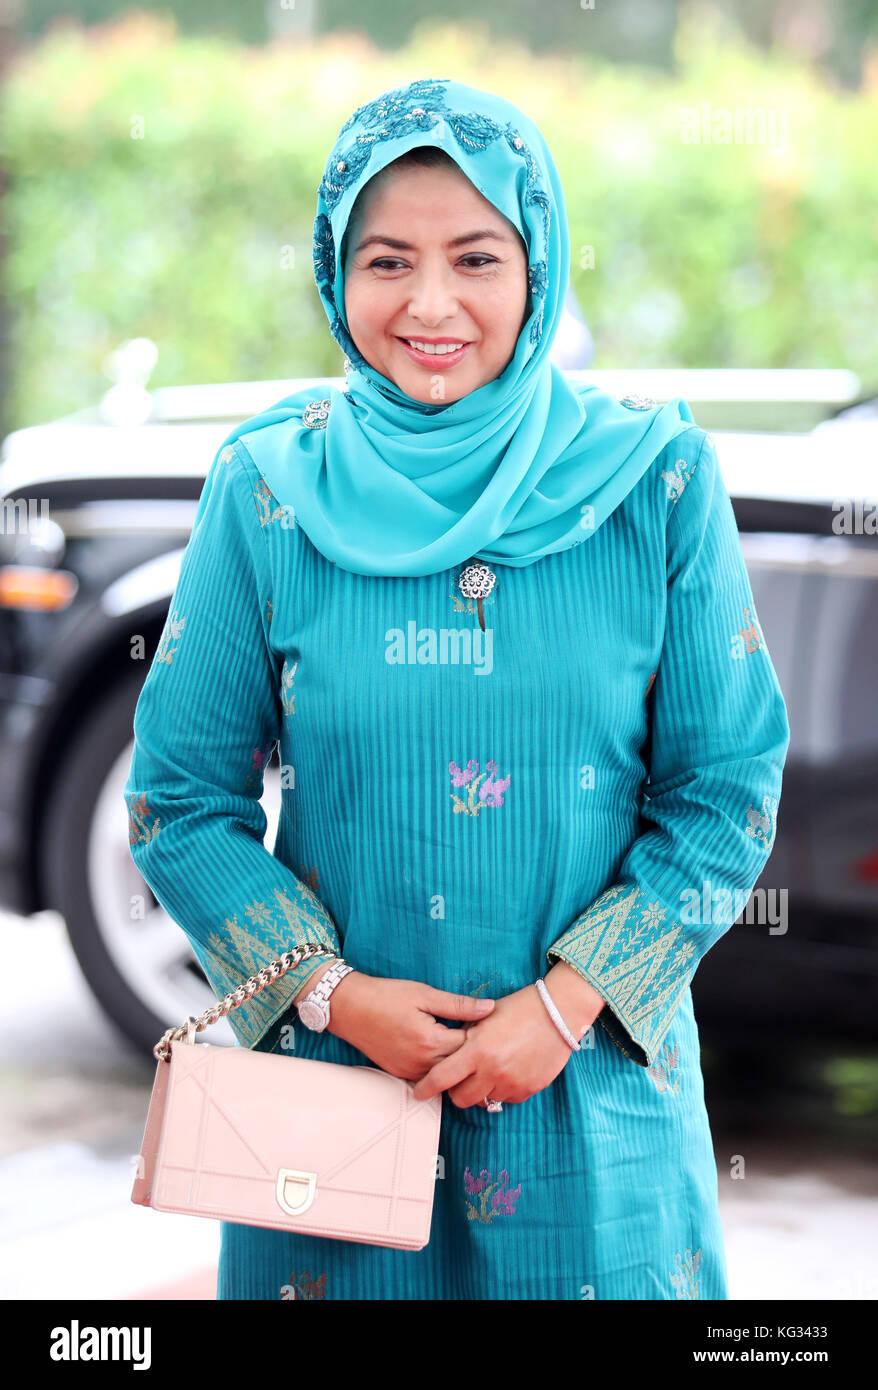 Her Majesty Raja Zarith Sofiah The Queen Of Johor Visits The International School At Parkcity In Kuala Lumpur Malaysia Stock Photo Alamy